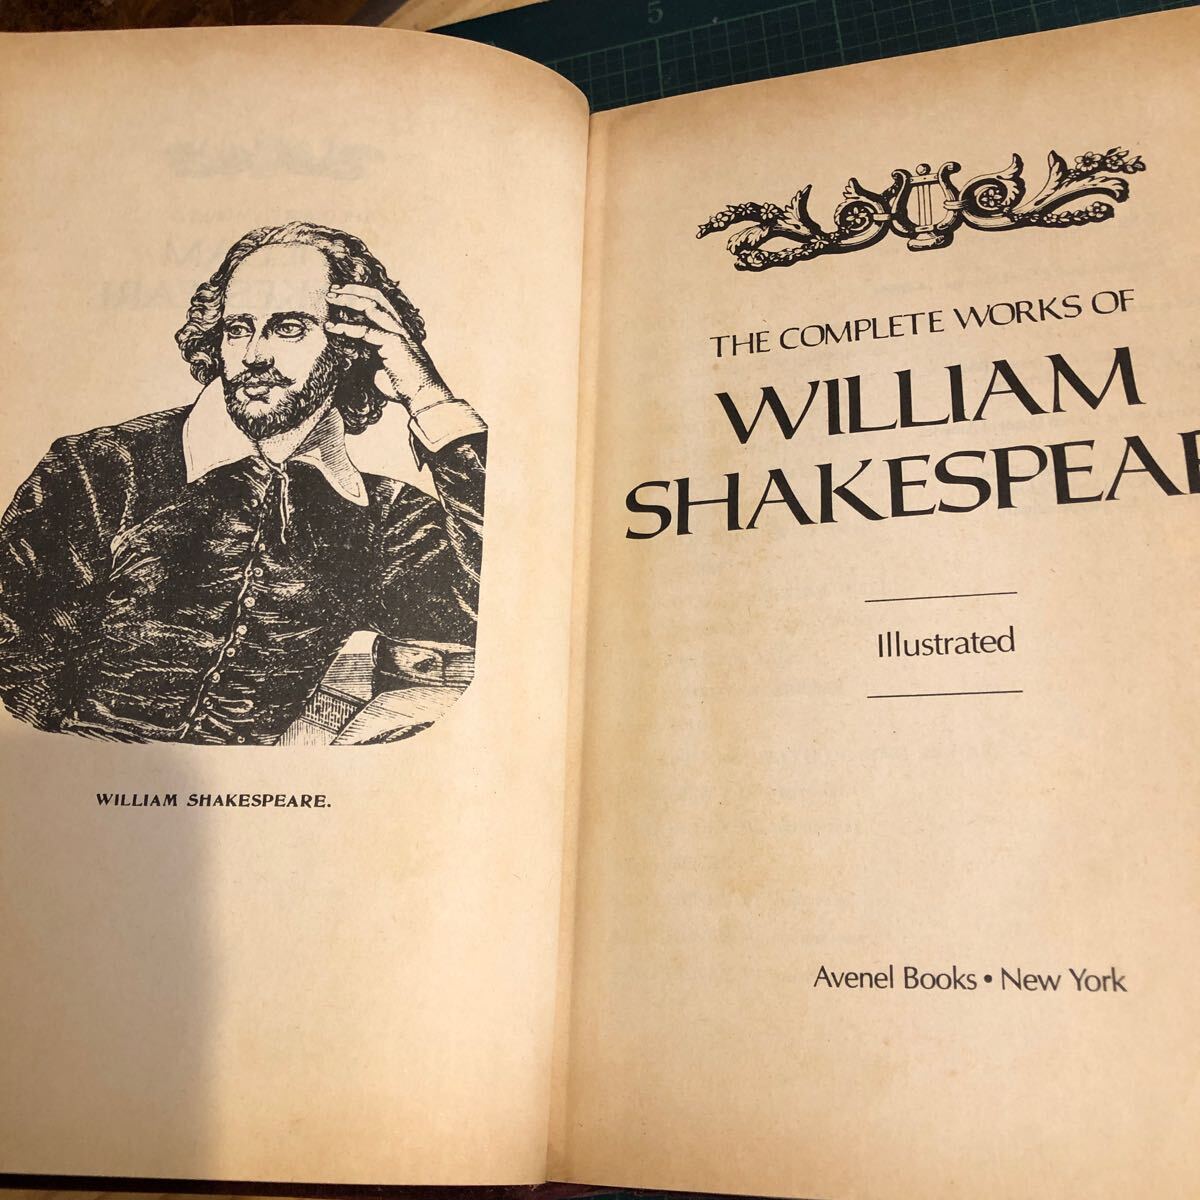 The Complete Works Of William Shakespeare - Hardcover 洋書 シェイクスピア全集　1986年　天金　インテリアディスプレイ _画像2